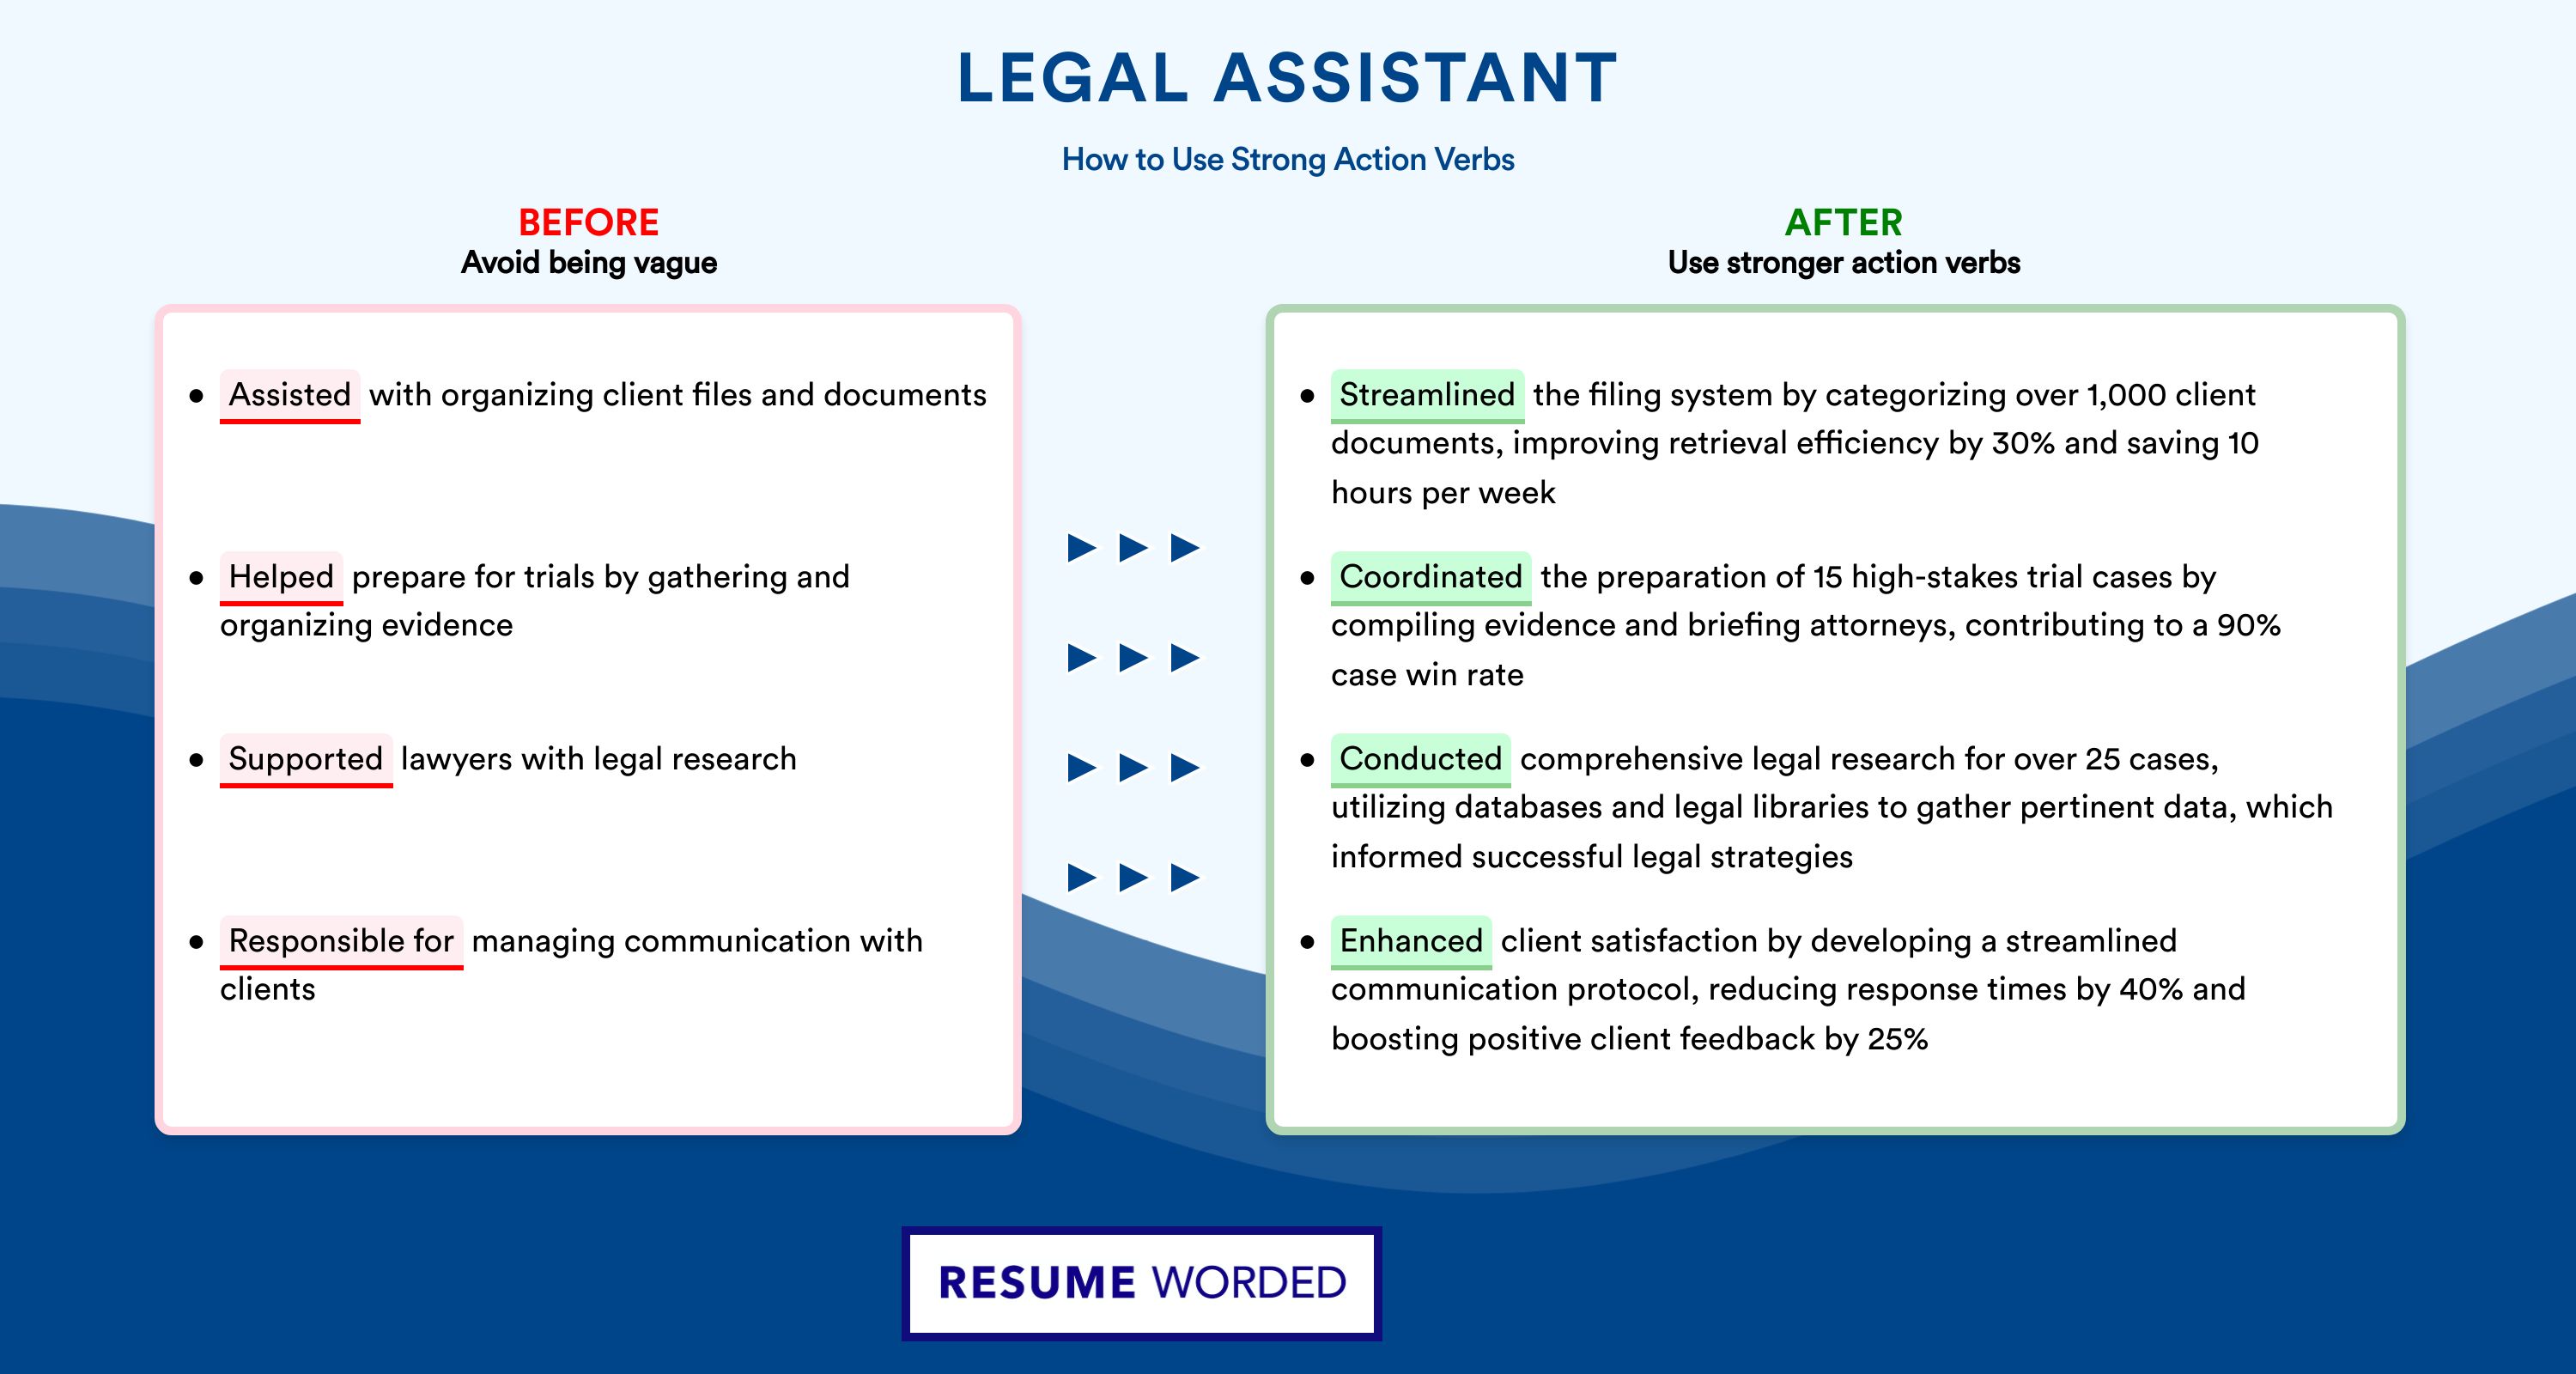 Action Verbs for Legal Assistant